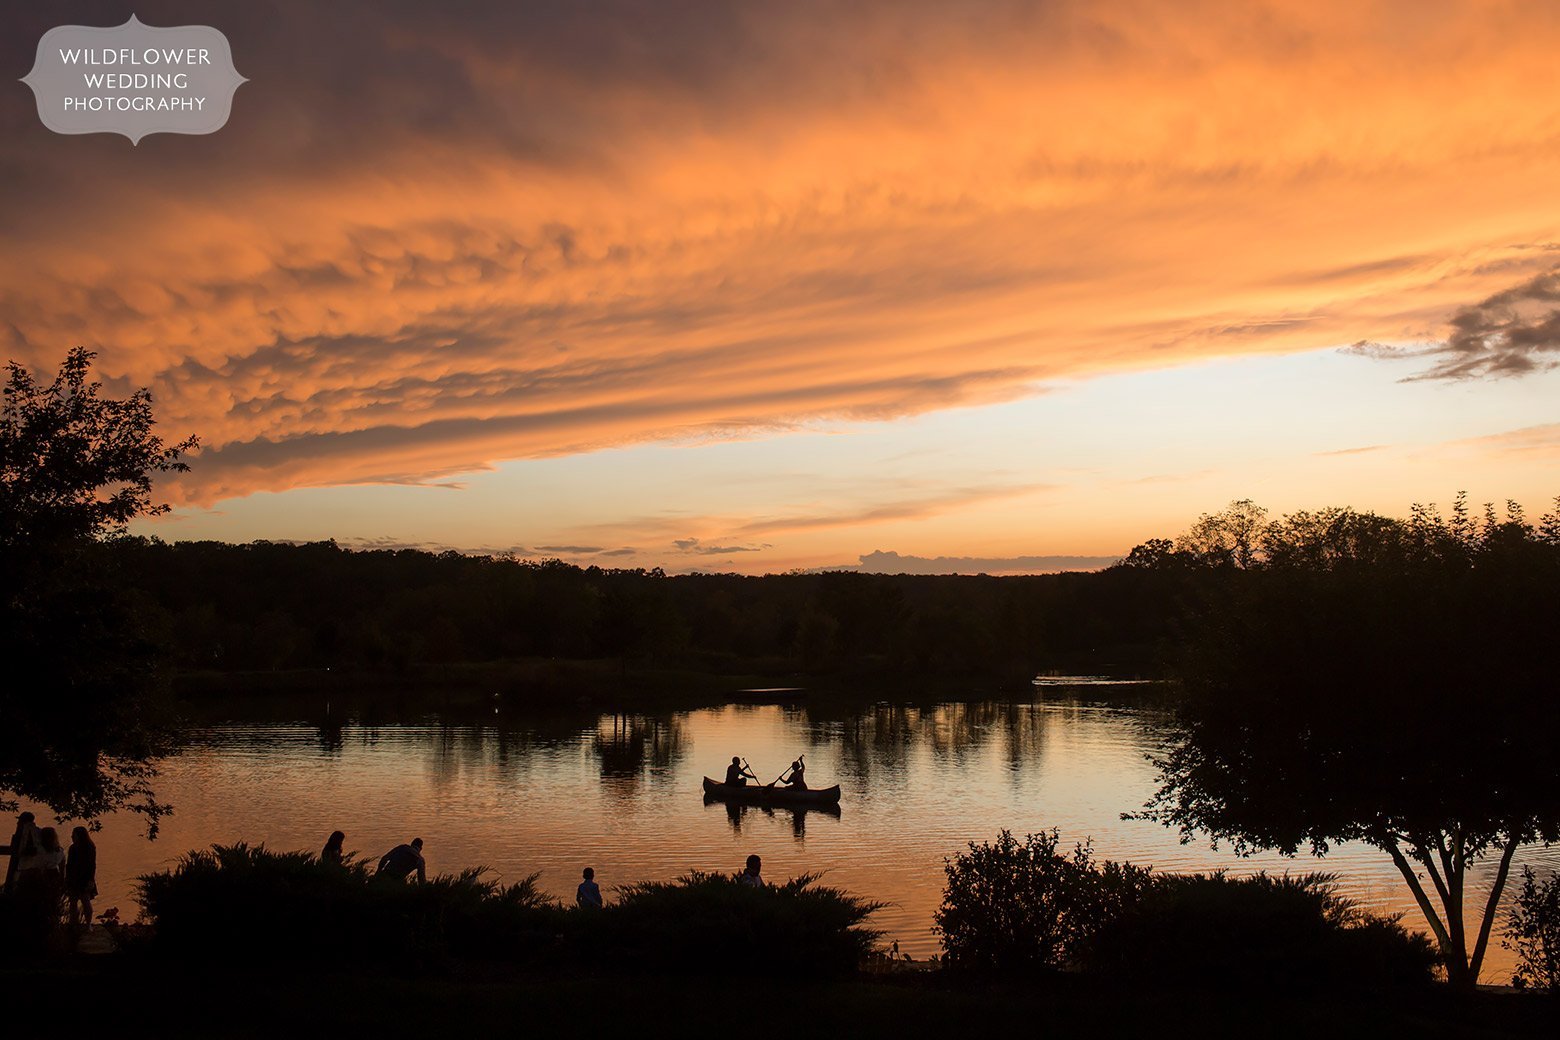 People canoeing under a pink sunset sky at Hermann MO wedding.